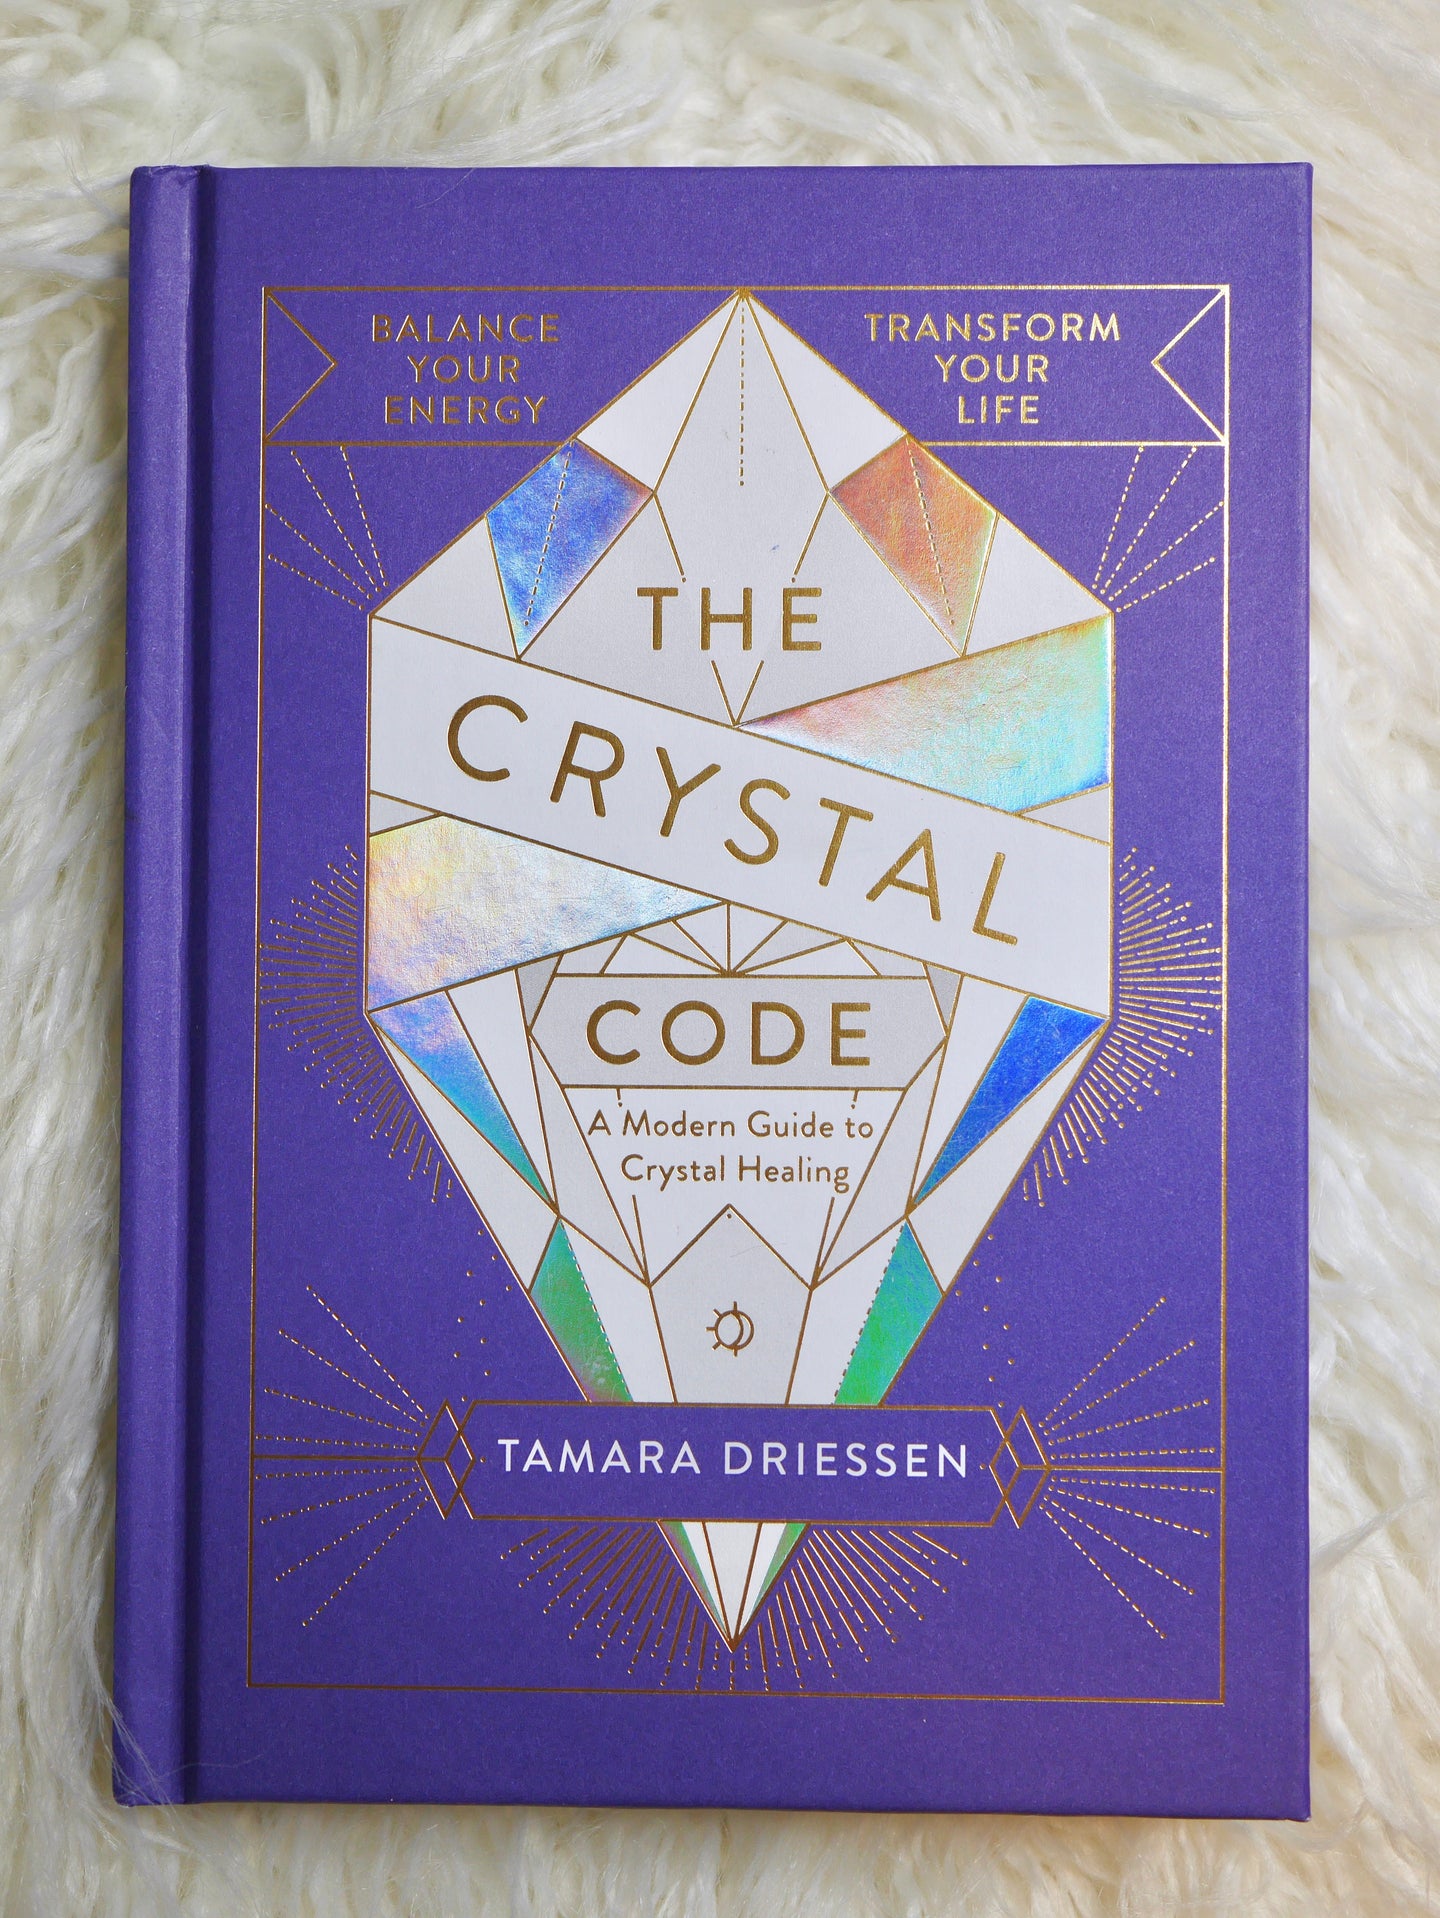 The crystal code